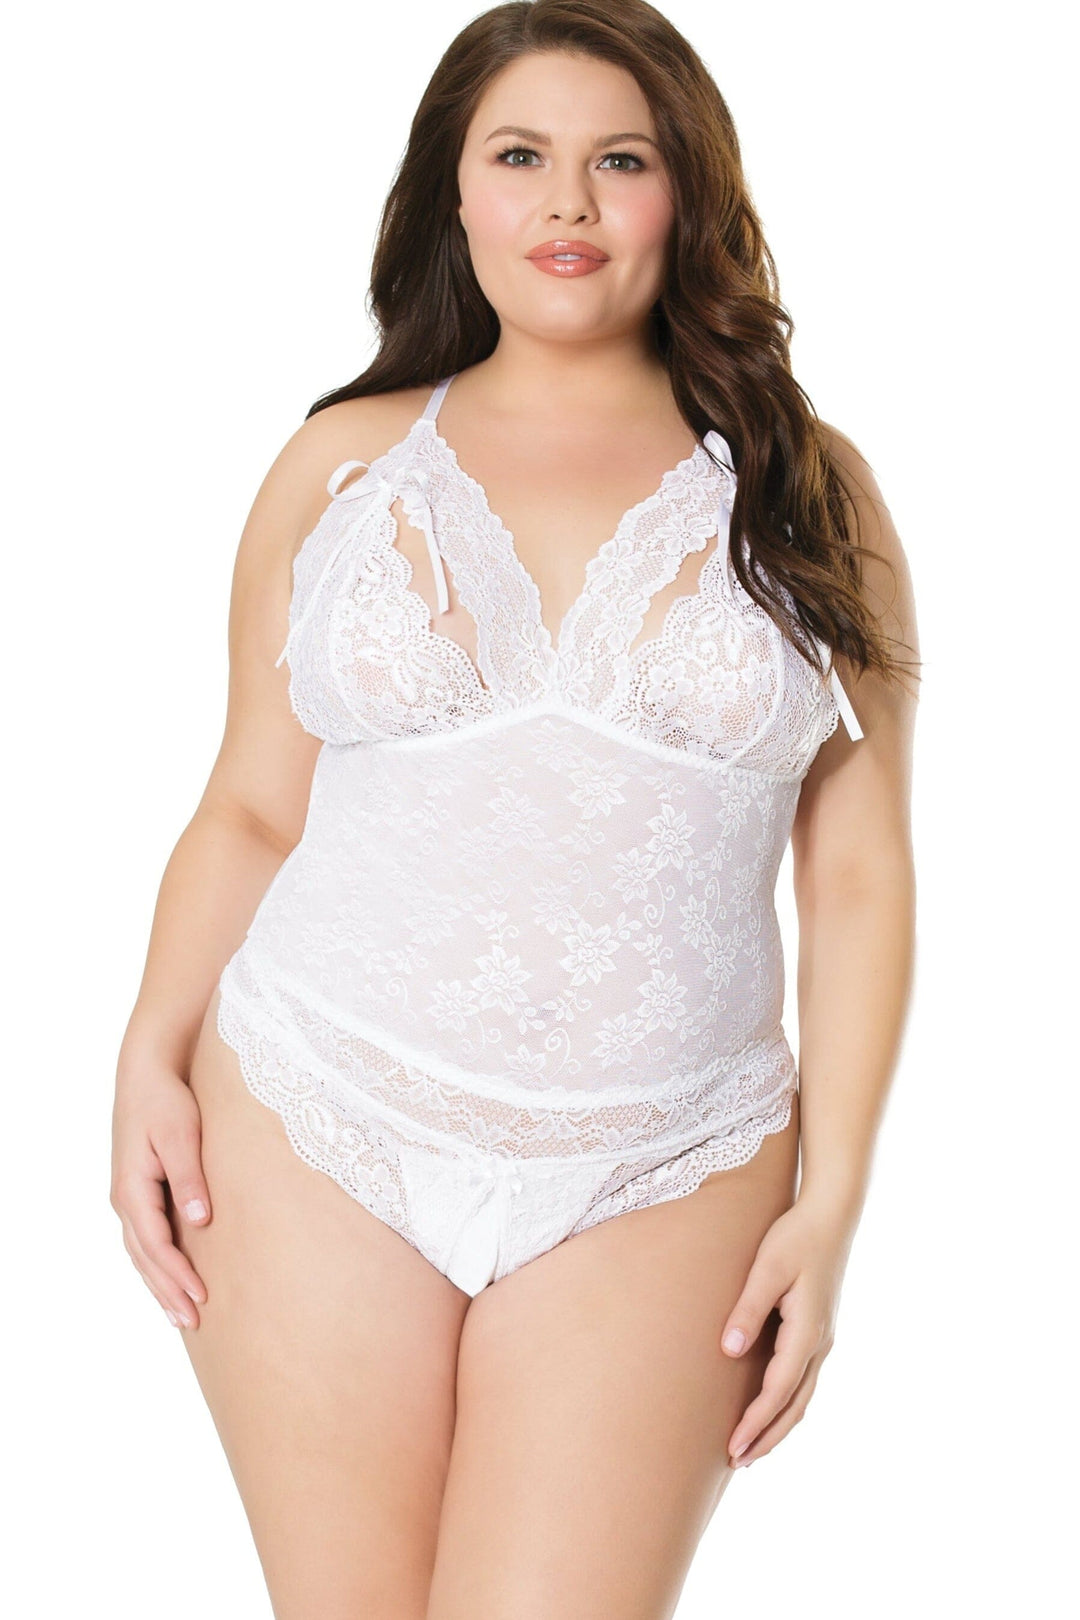 Scallop Stretch Lace Crotchless Teddy | Plus Size-Teddies-Coquette-White-Q-SEXYSHOES.COM